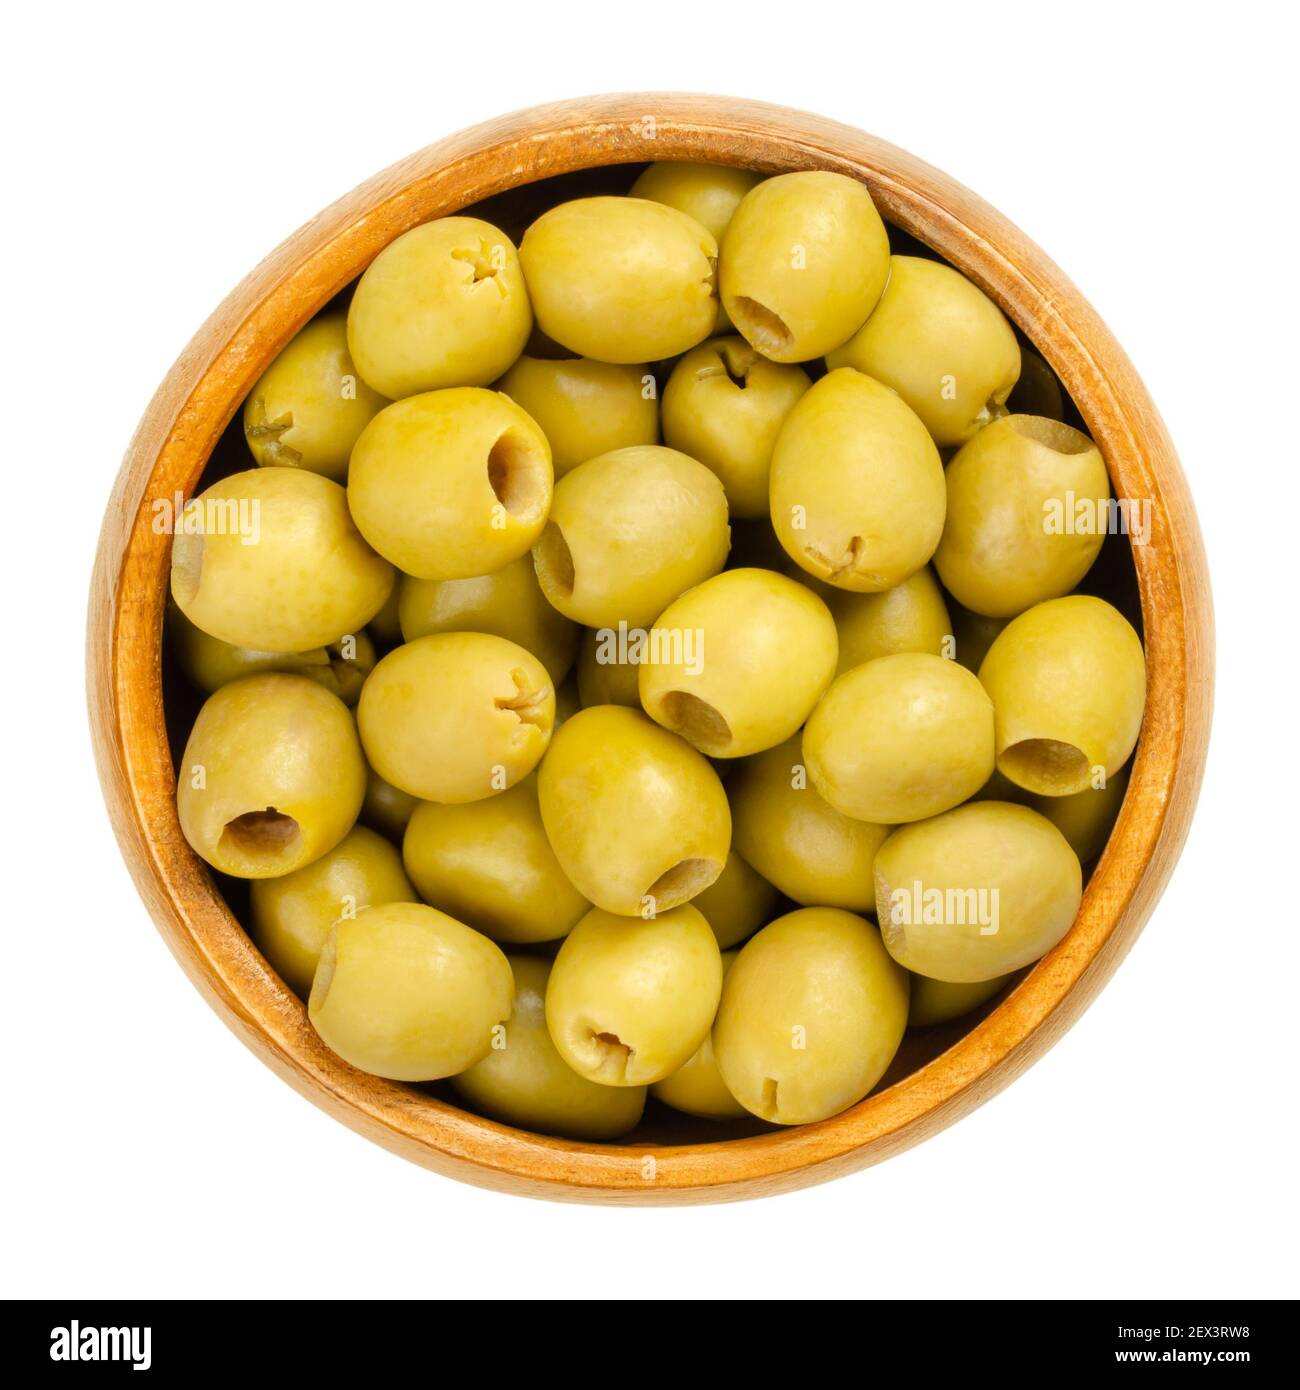 Pickled and pitted small green table olives in a wooden bowl. Green fruits of Olea europaea, unripe picked, cured and fermented before preservation. Stock Photo